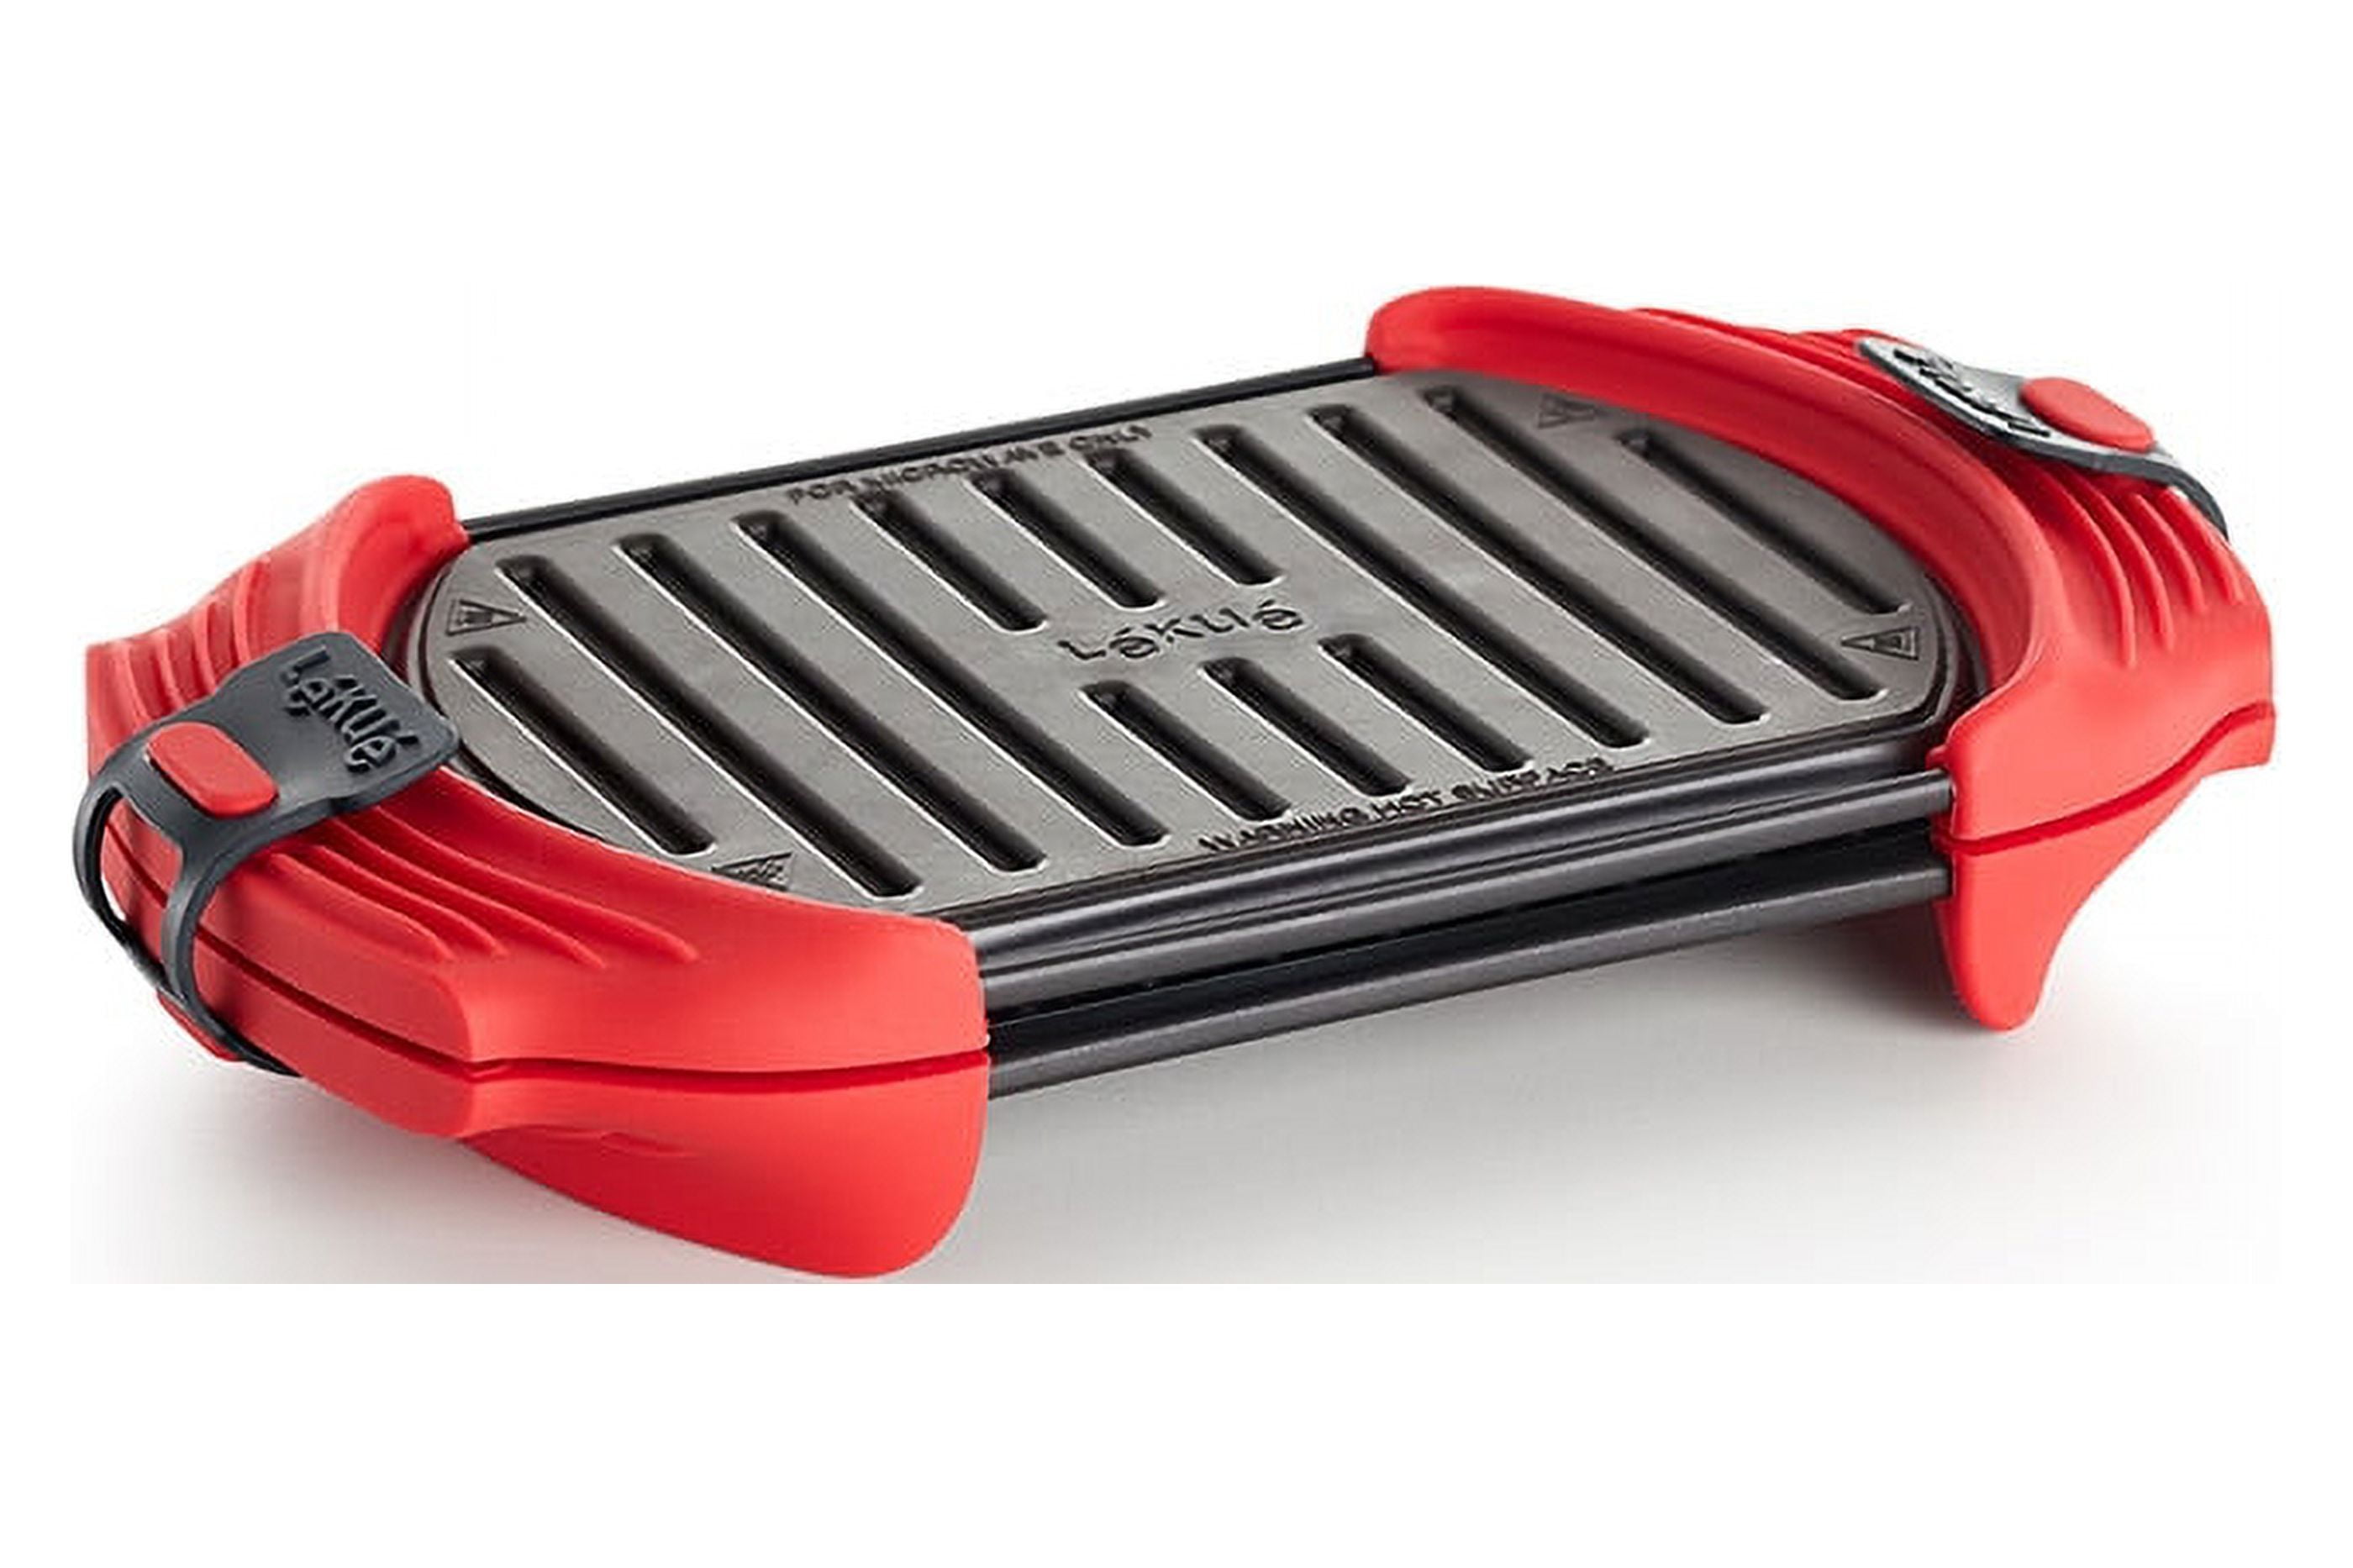 Microwave Panini Press | Microwave Grill Cheese Maker | Microwave Crisper Toaster Cookware | Cooking Fast and Dishwasher Safe